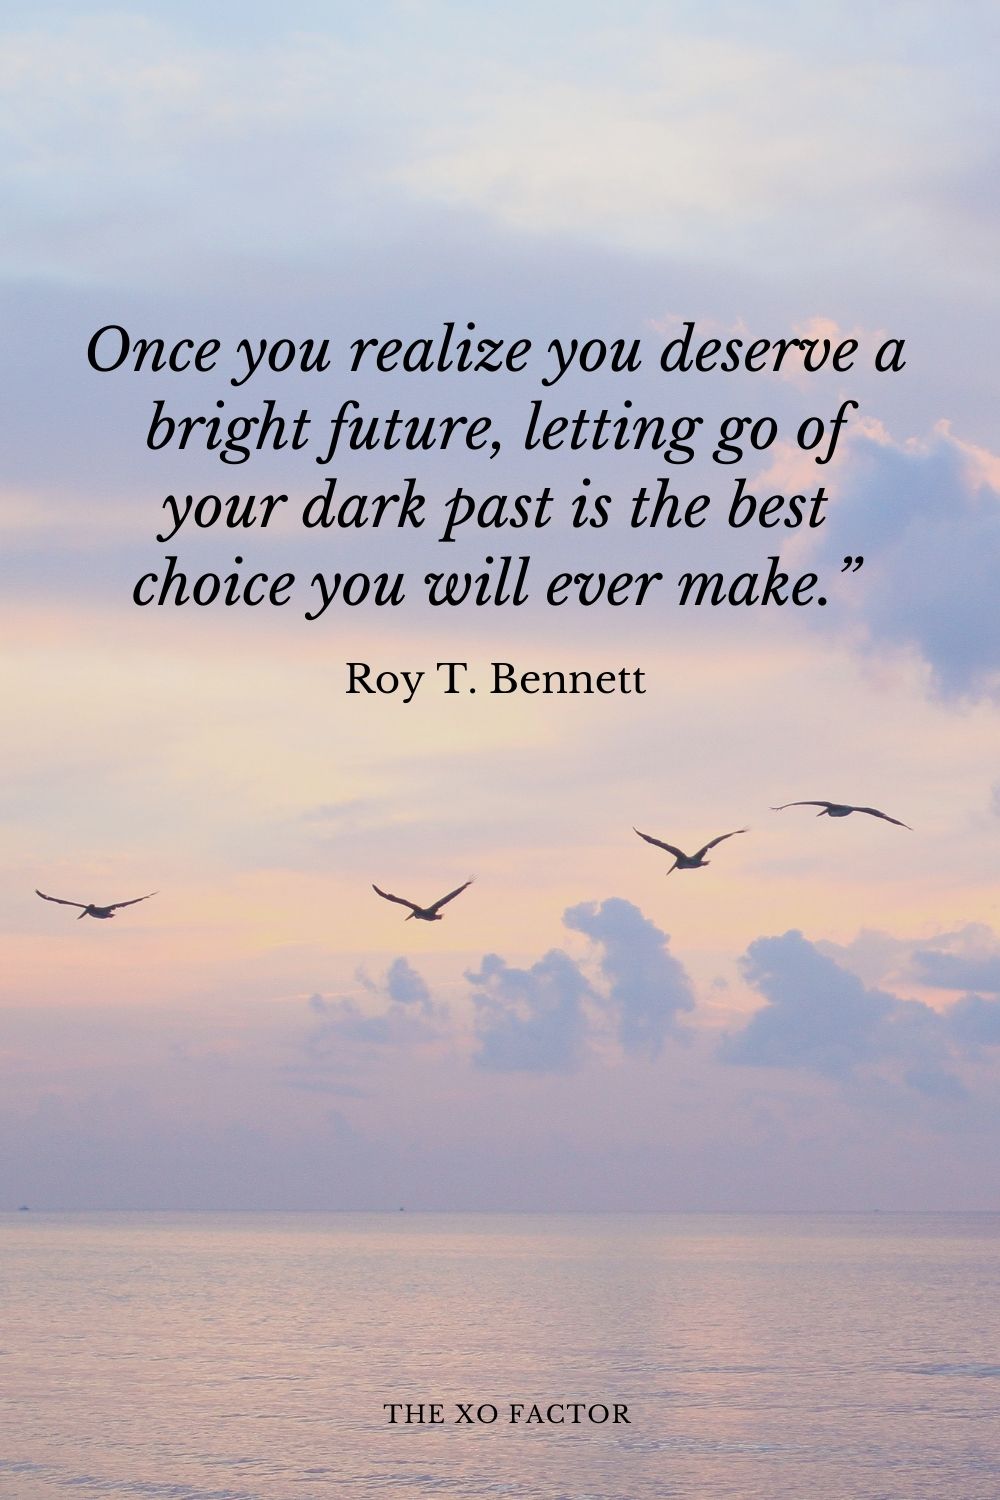 Once you realize you deserve a bright future, letting go of your dark past is the best choice you will ever make.” Roy T. Bennett